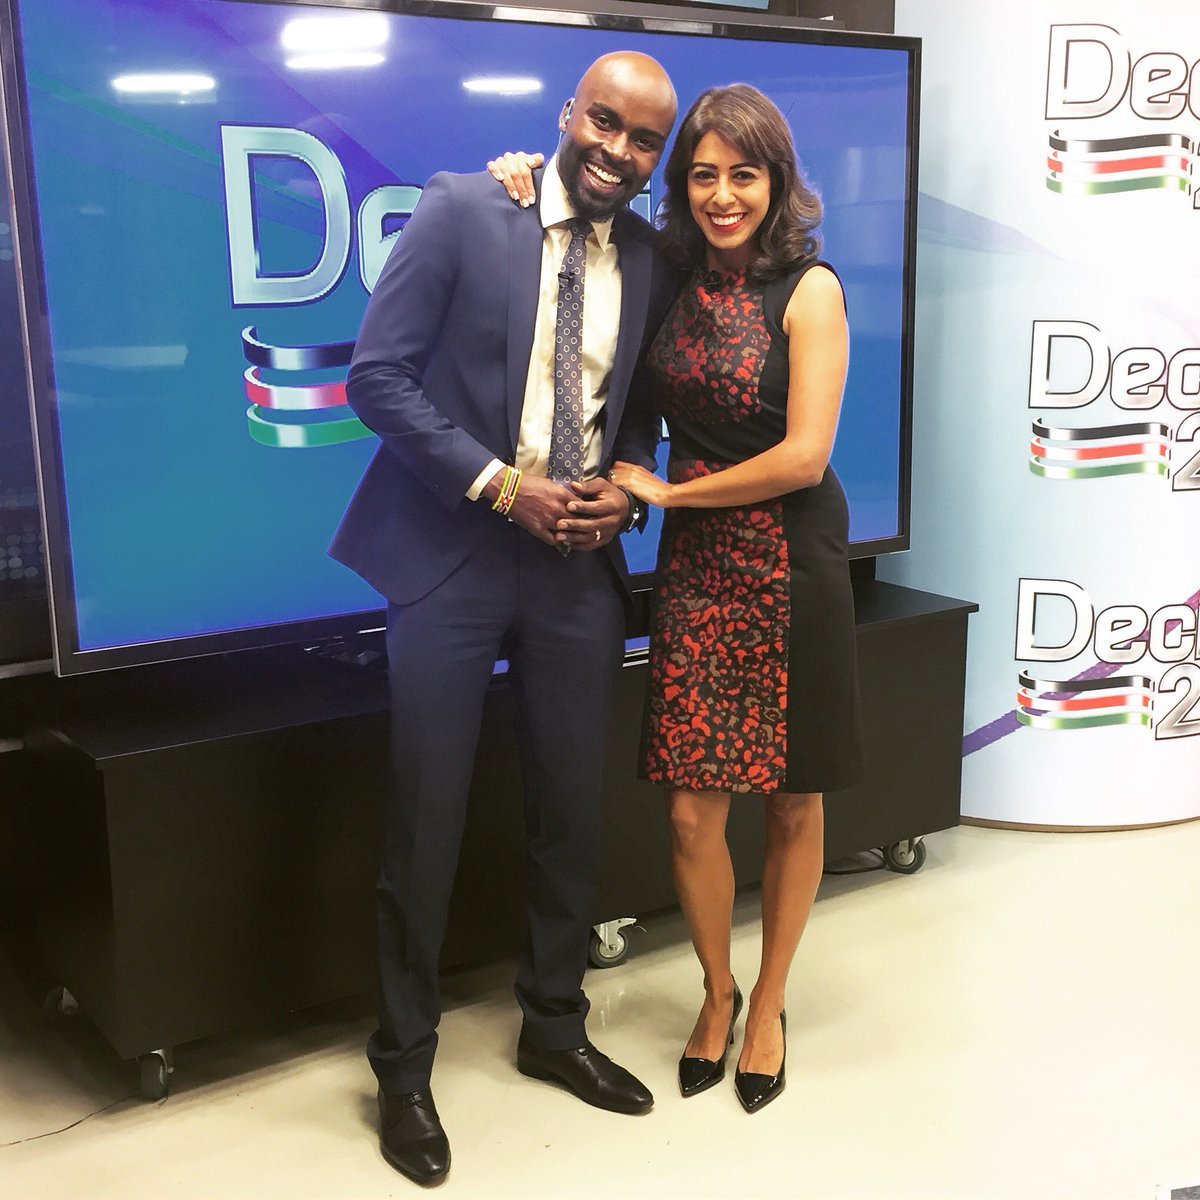 Seasons of blessings!! Yet another top news anchor is pregnant, shares photos of baby shower